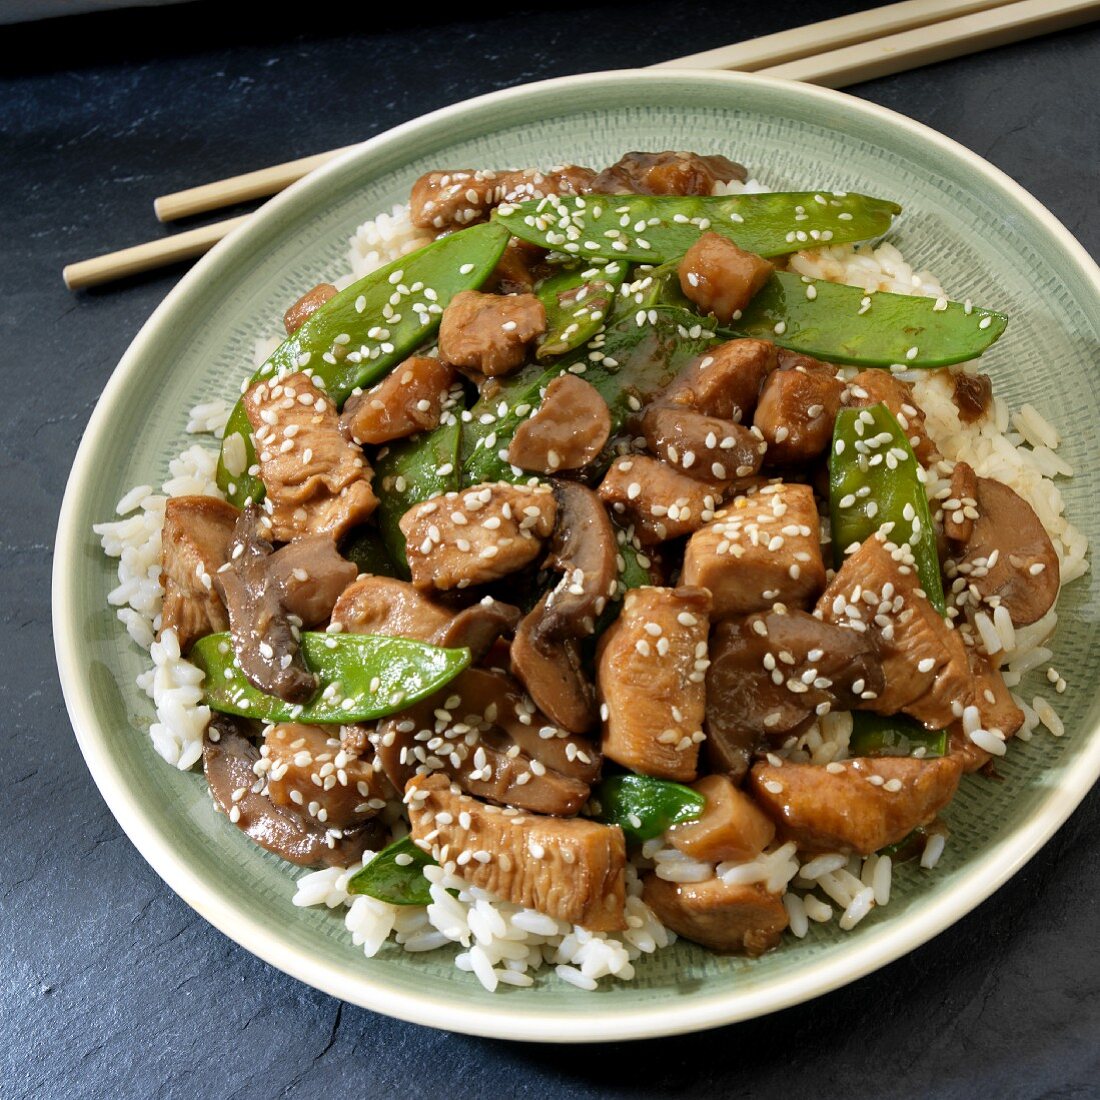 Stir-fried chicken with mangetout on a bed of rice (Asia)